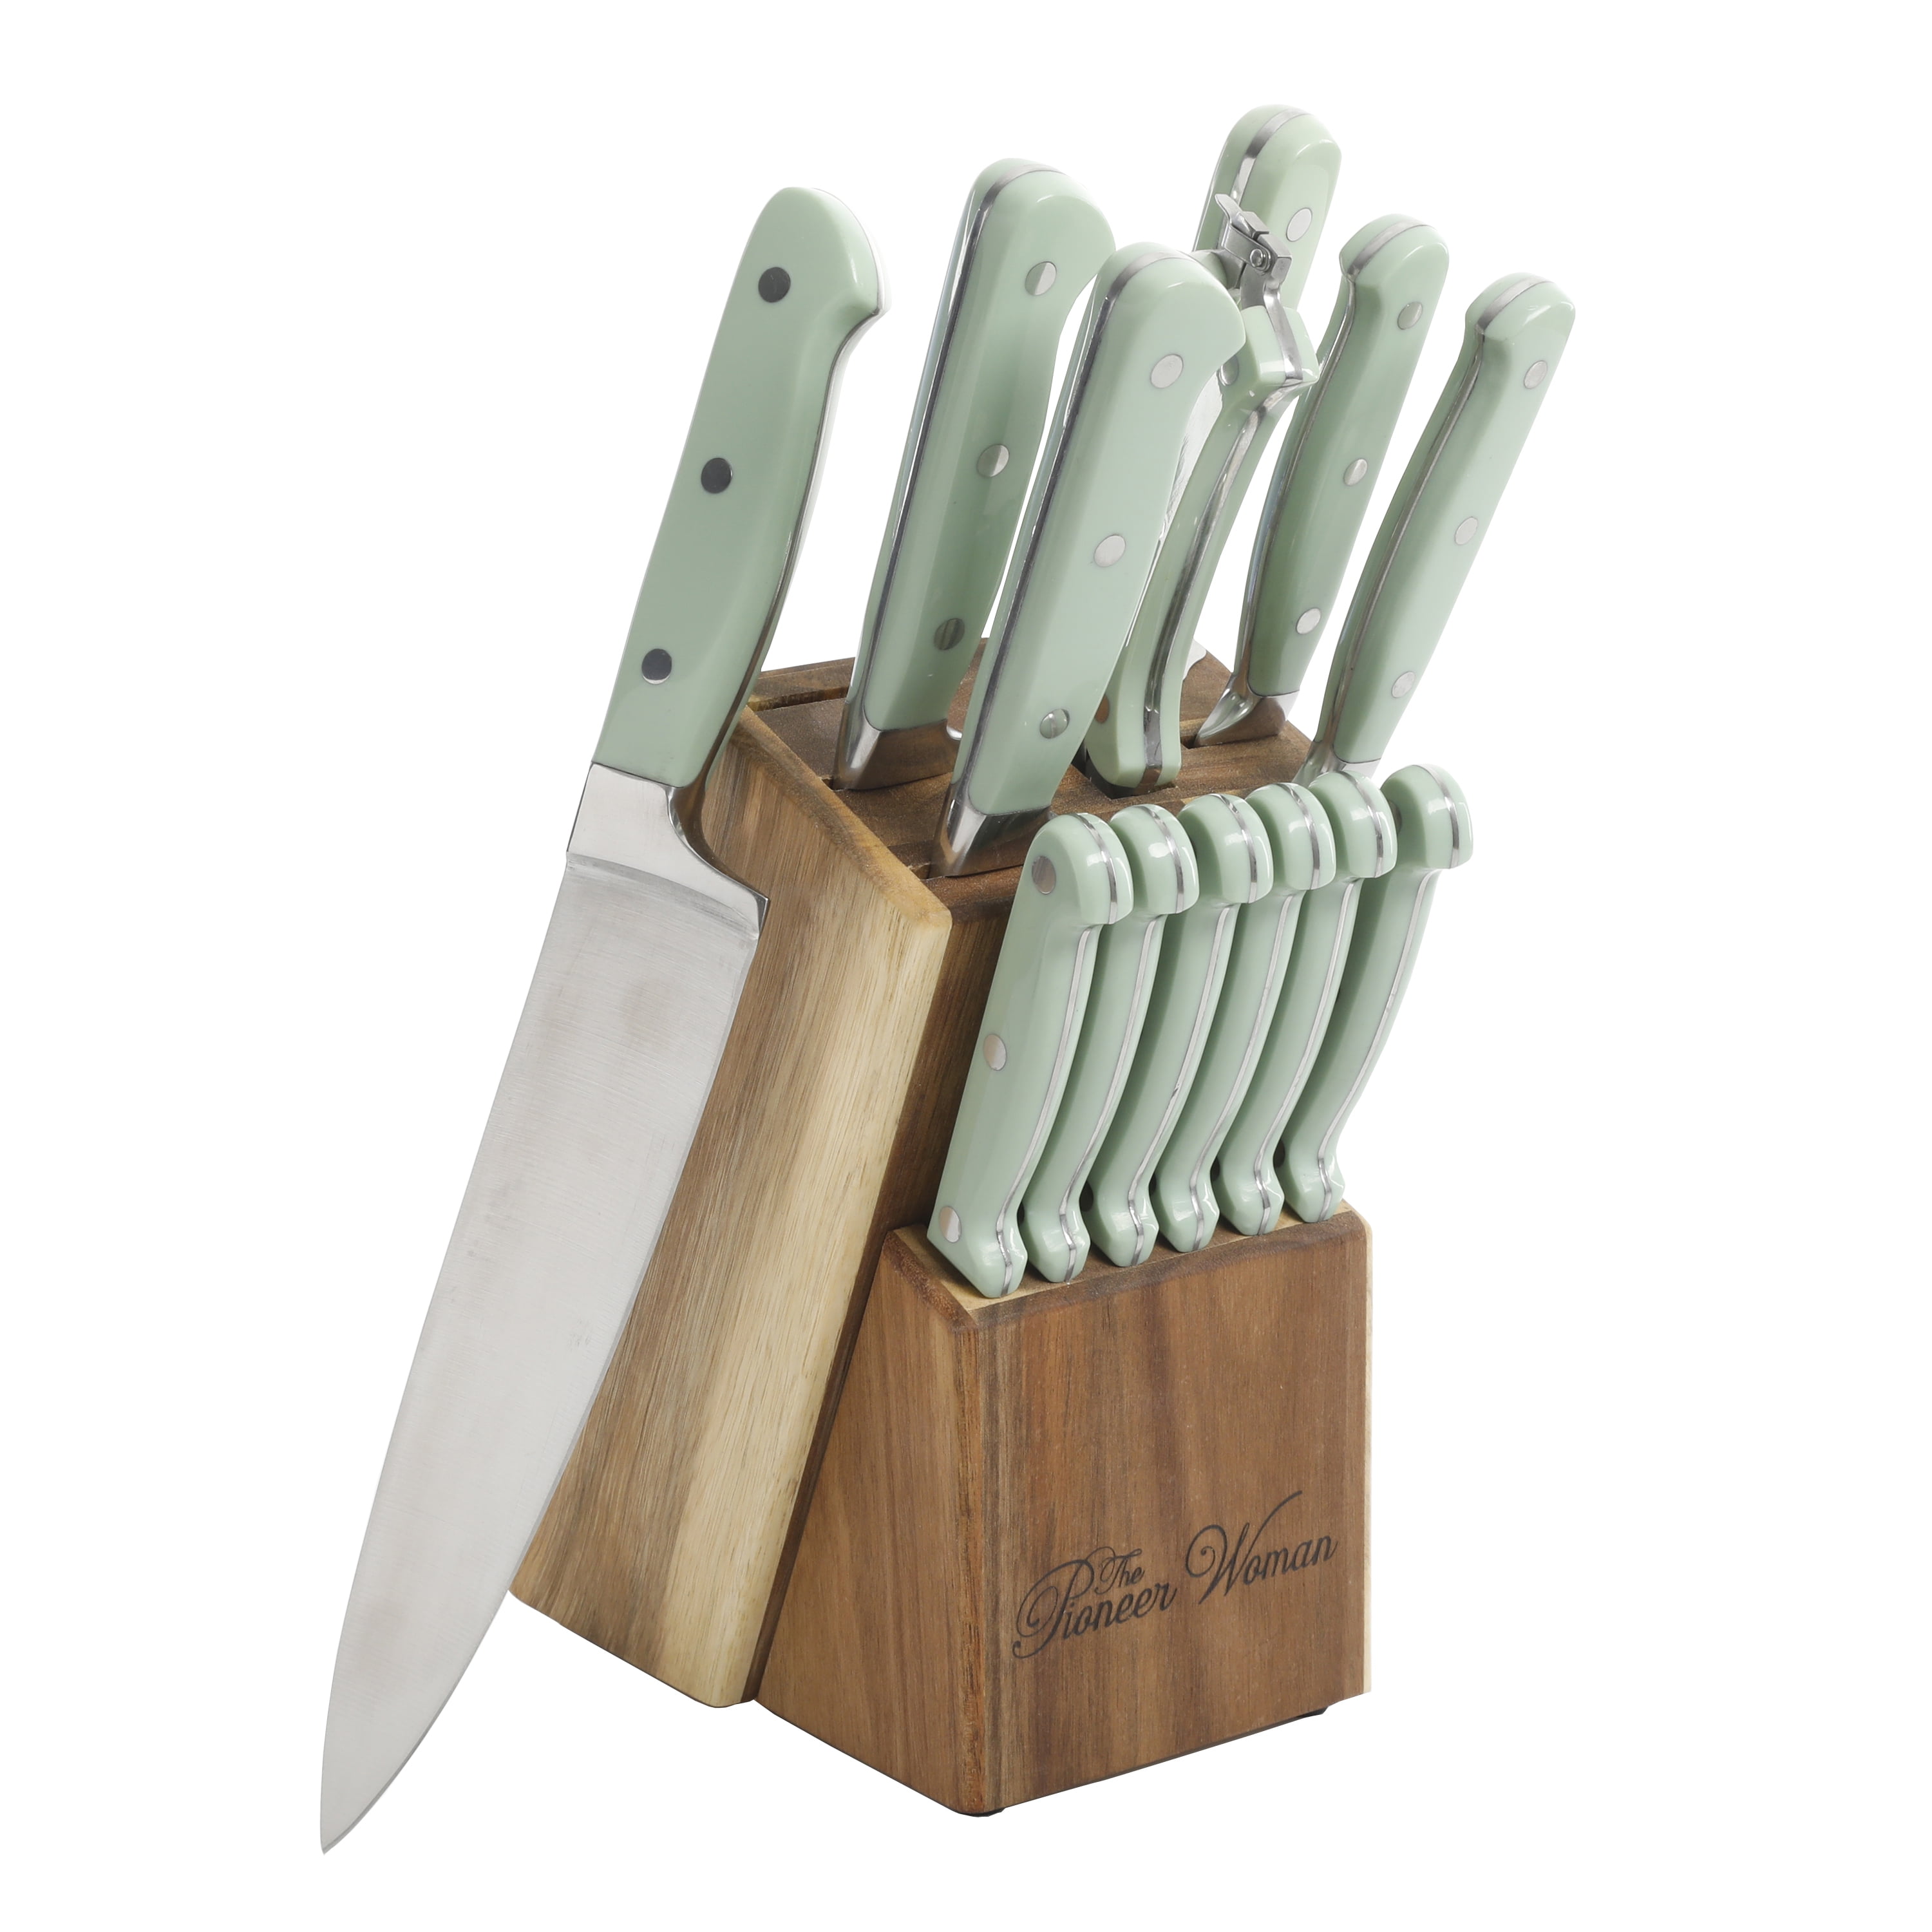 The Pioneer Woman Vintage Floral 14-Piece Cutlery Set with Wood Block 